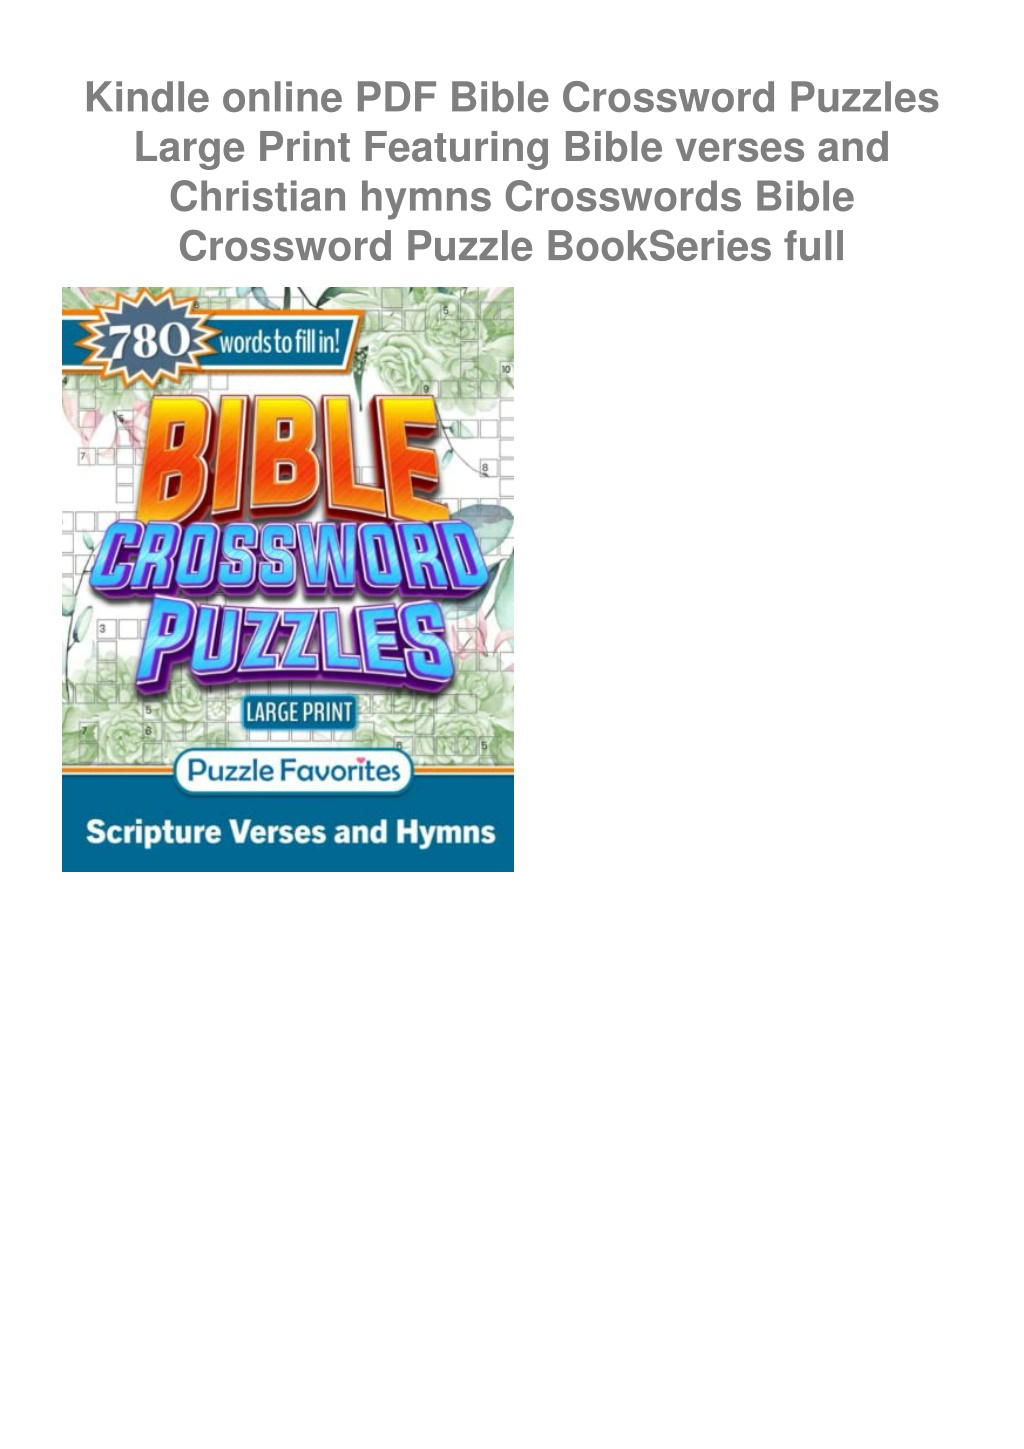 PPT Kindle online PDF Bible Crossword Puzzles Large Print Featuring